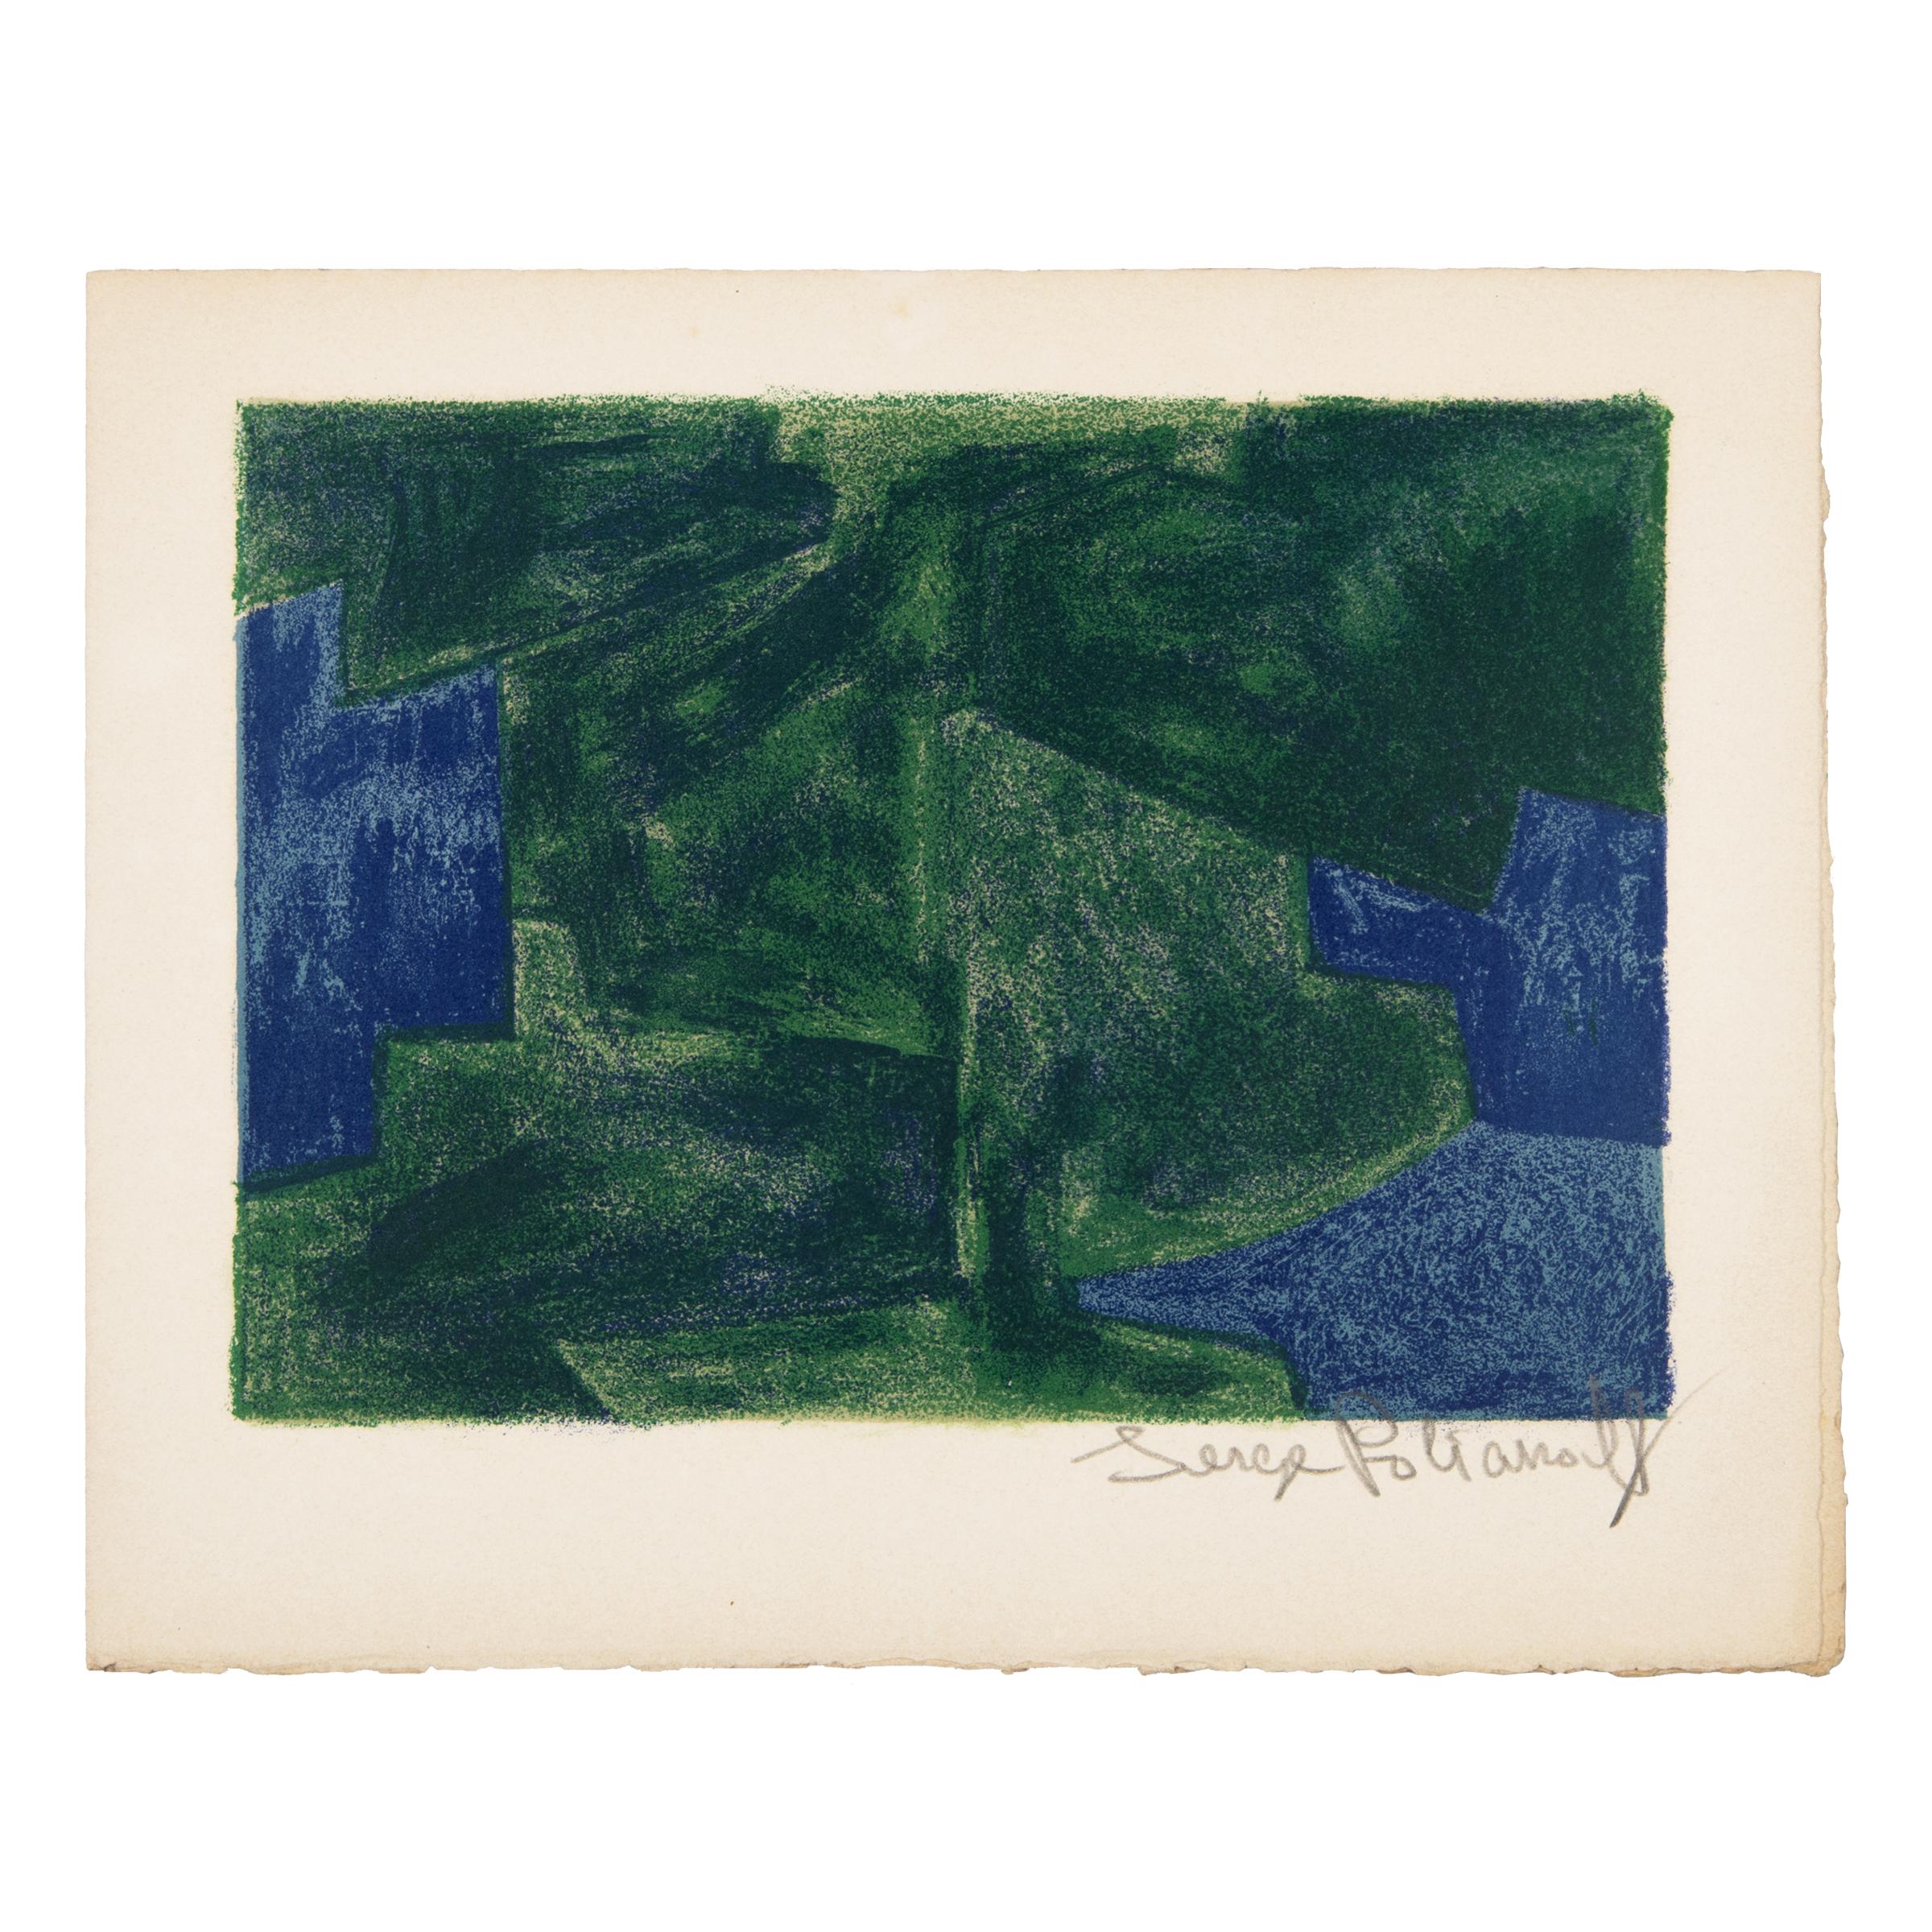 Serge Poliakoff
Composition bleu et verte, 1963
Lithograph on paper
10 3/10 × 12 4/5 in  26.2 × 32.5 cm
Edition of 200: Hand-signed in pencil

Original (double-sided) greeting card from 1963, published by the La Source, Paris. Printed by Pons,